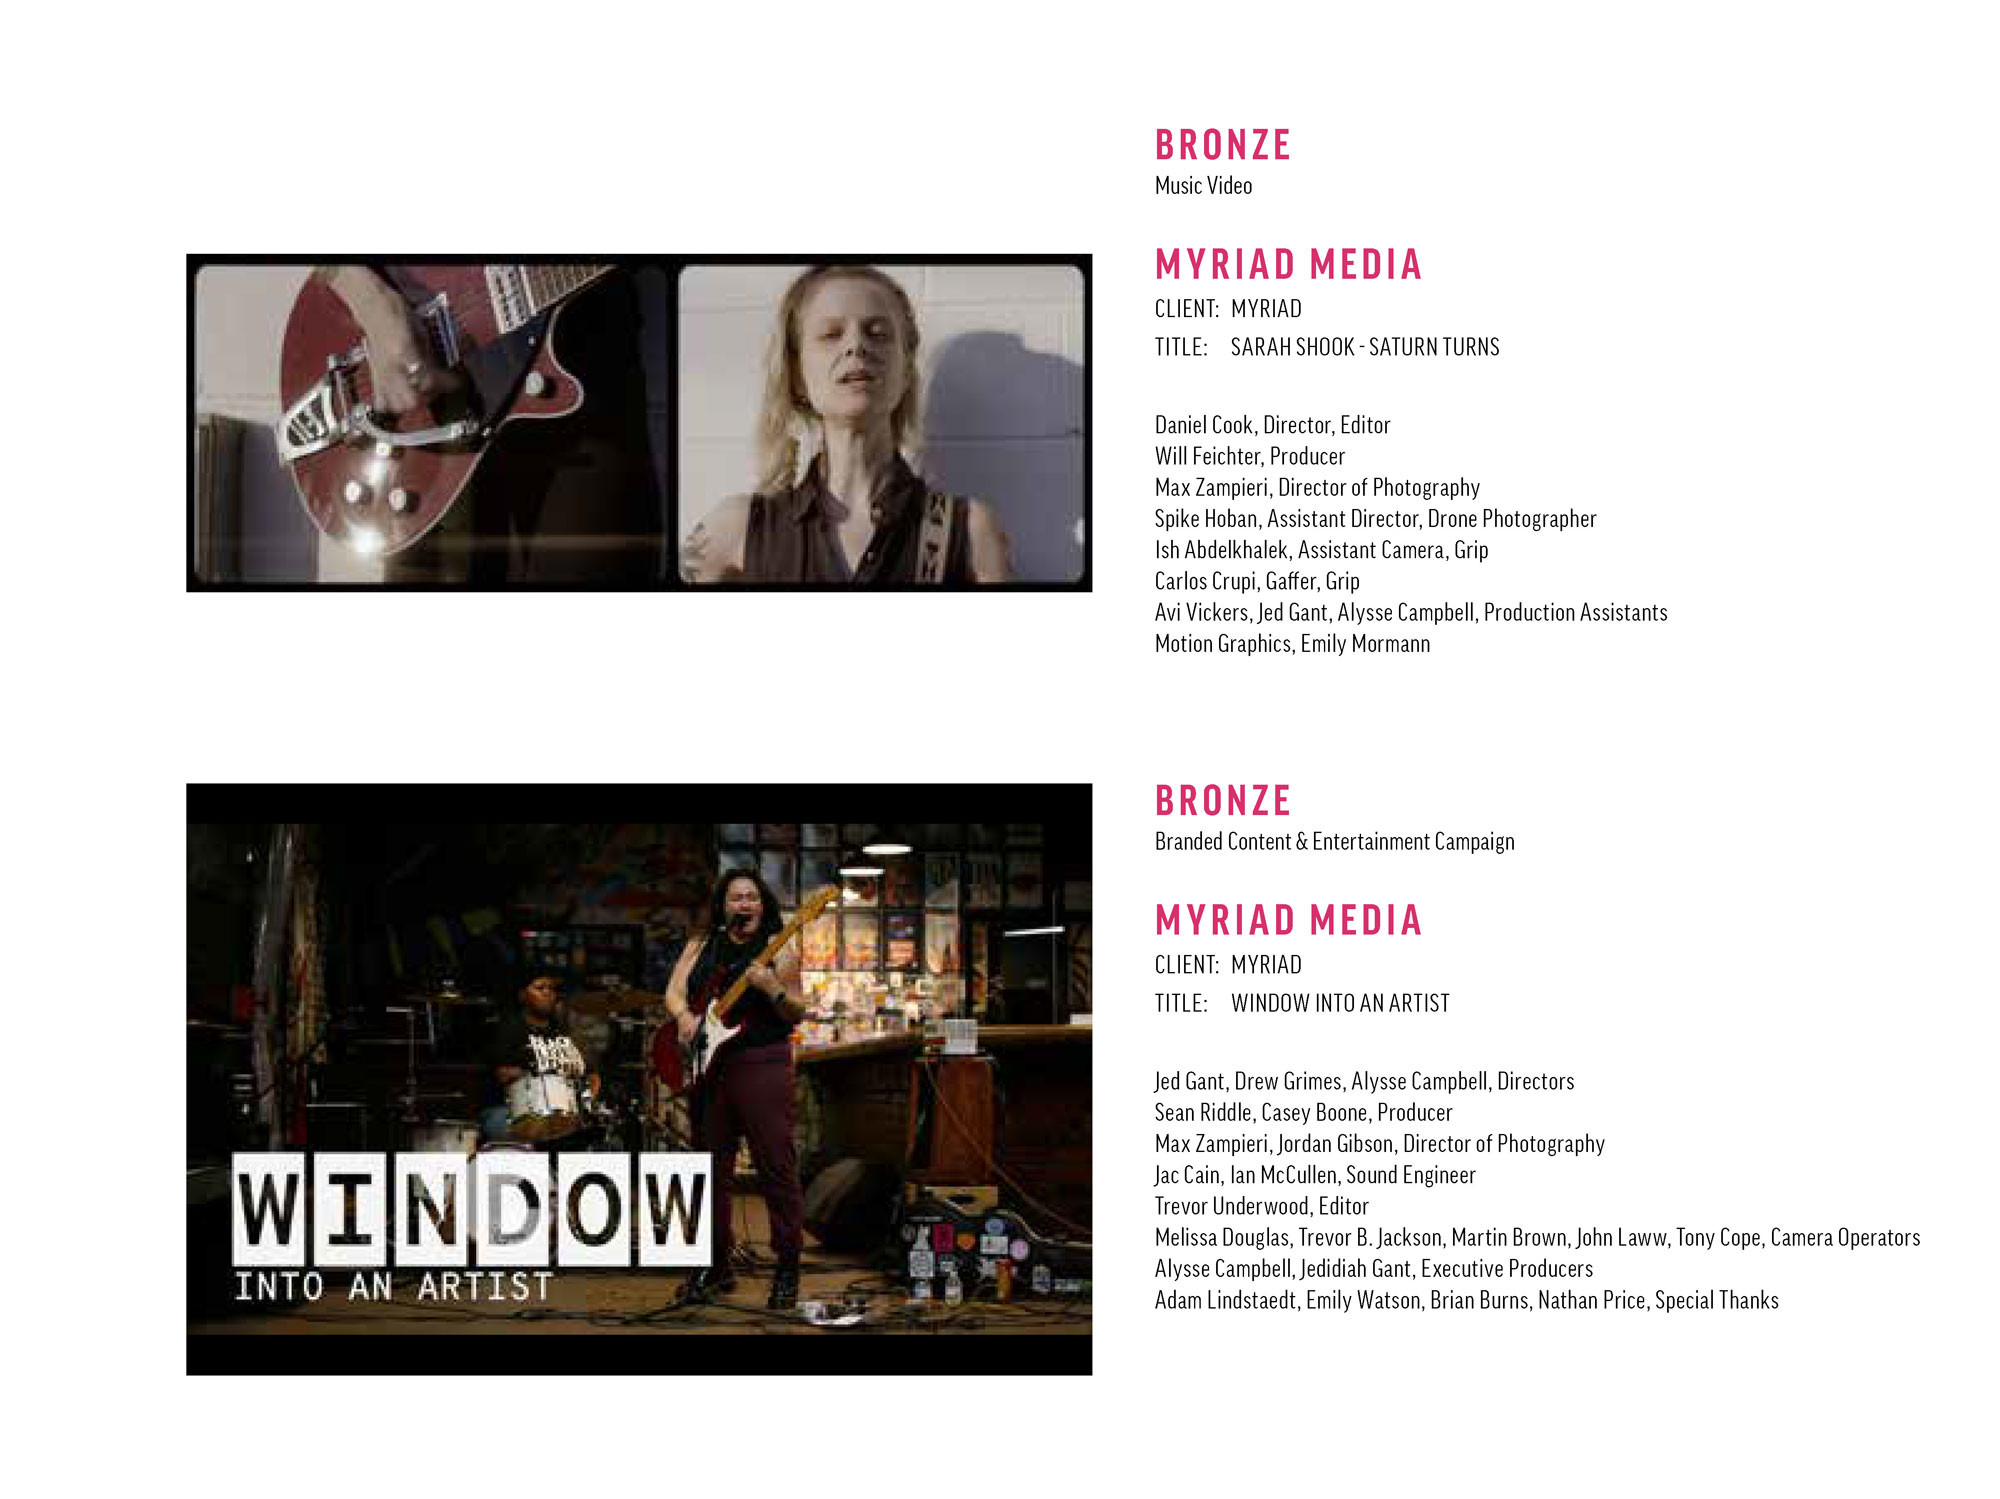 Bronze awards for the Sarah Shook - Saturn Turns film and the Window Into An Artist film